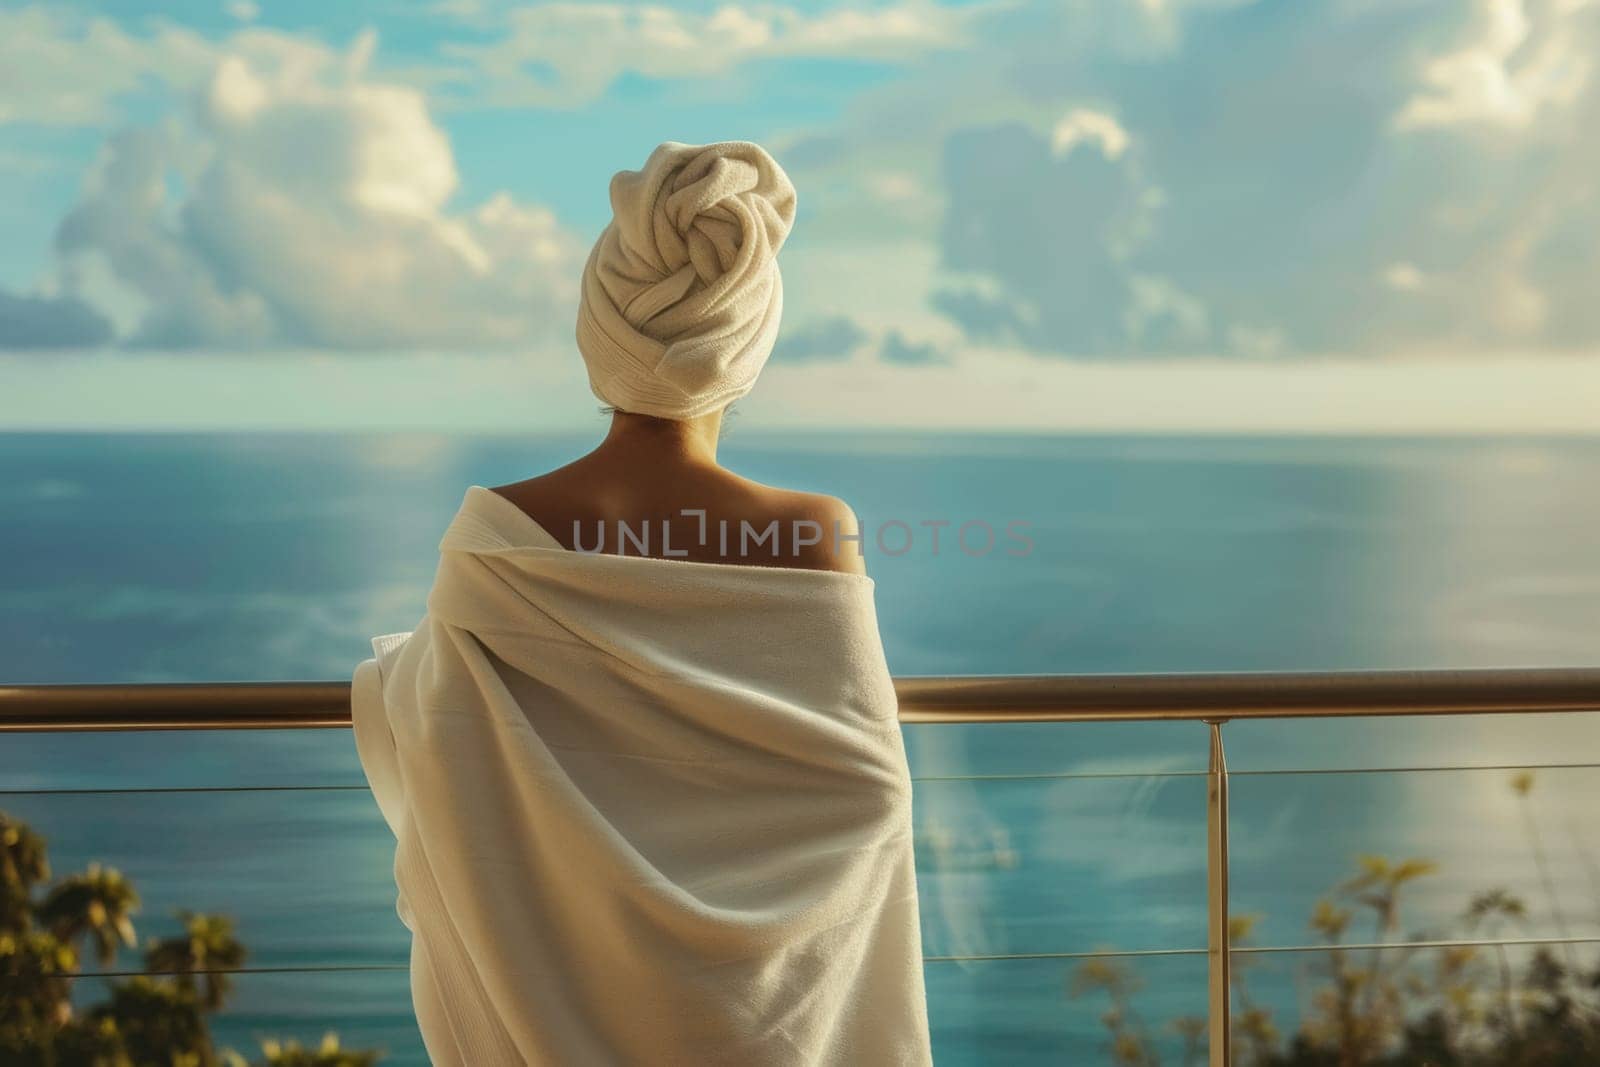 The back view of an individual in a towel, peacefully observing the sunset from a ship's deck, evokes a sense of calm and reflection